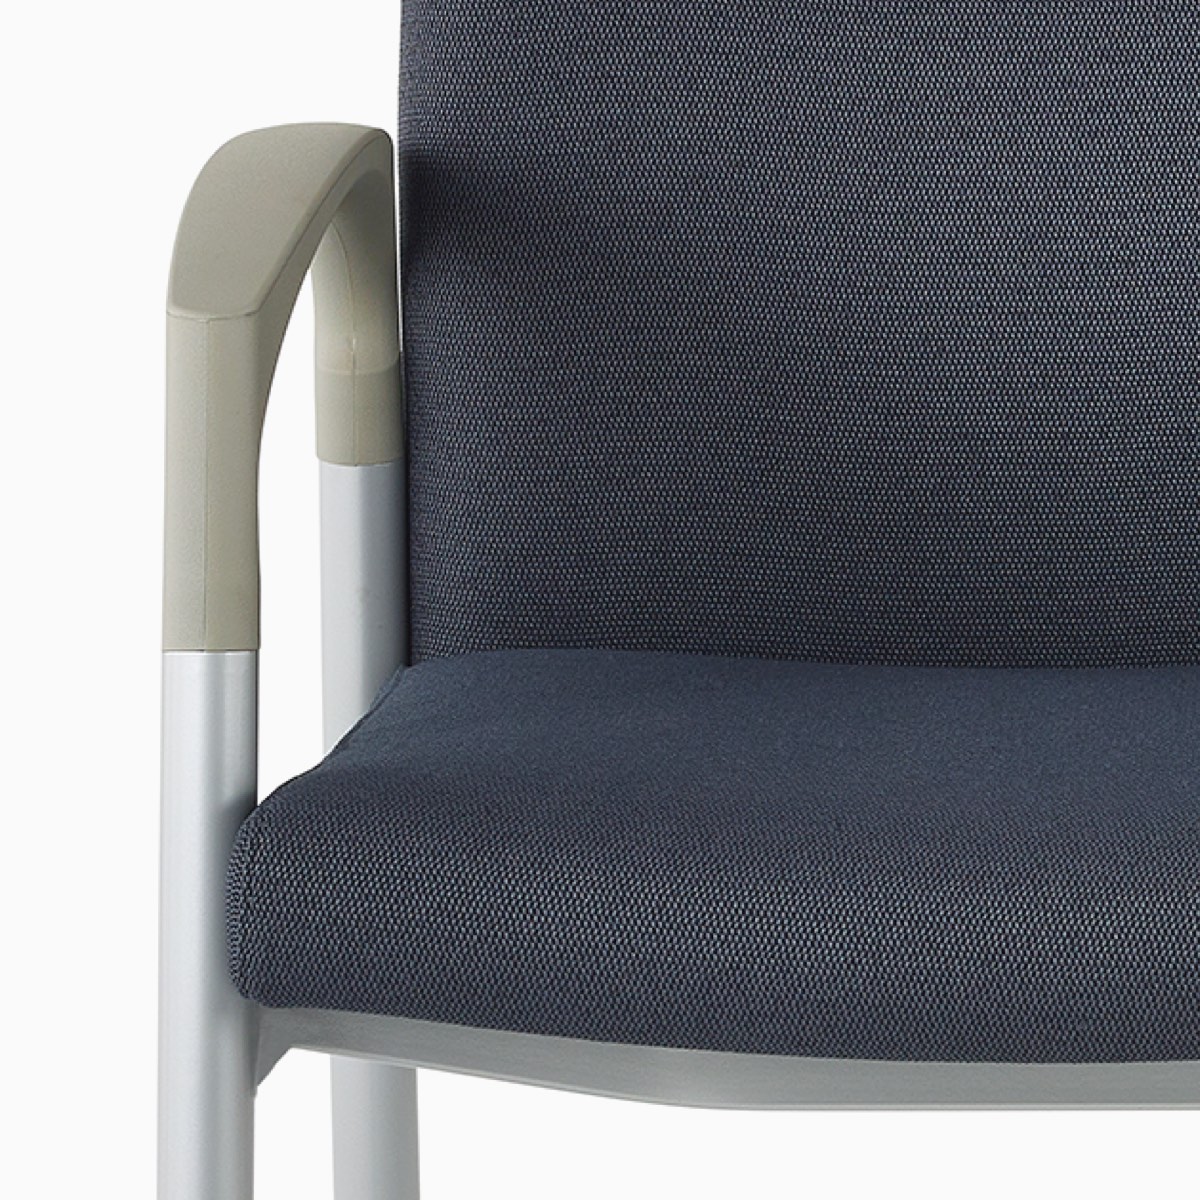 Detail of a Valor chair contoured arm and armcap.